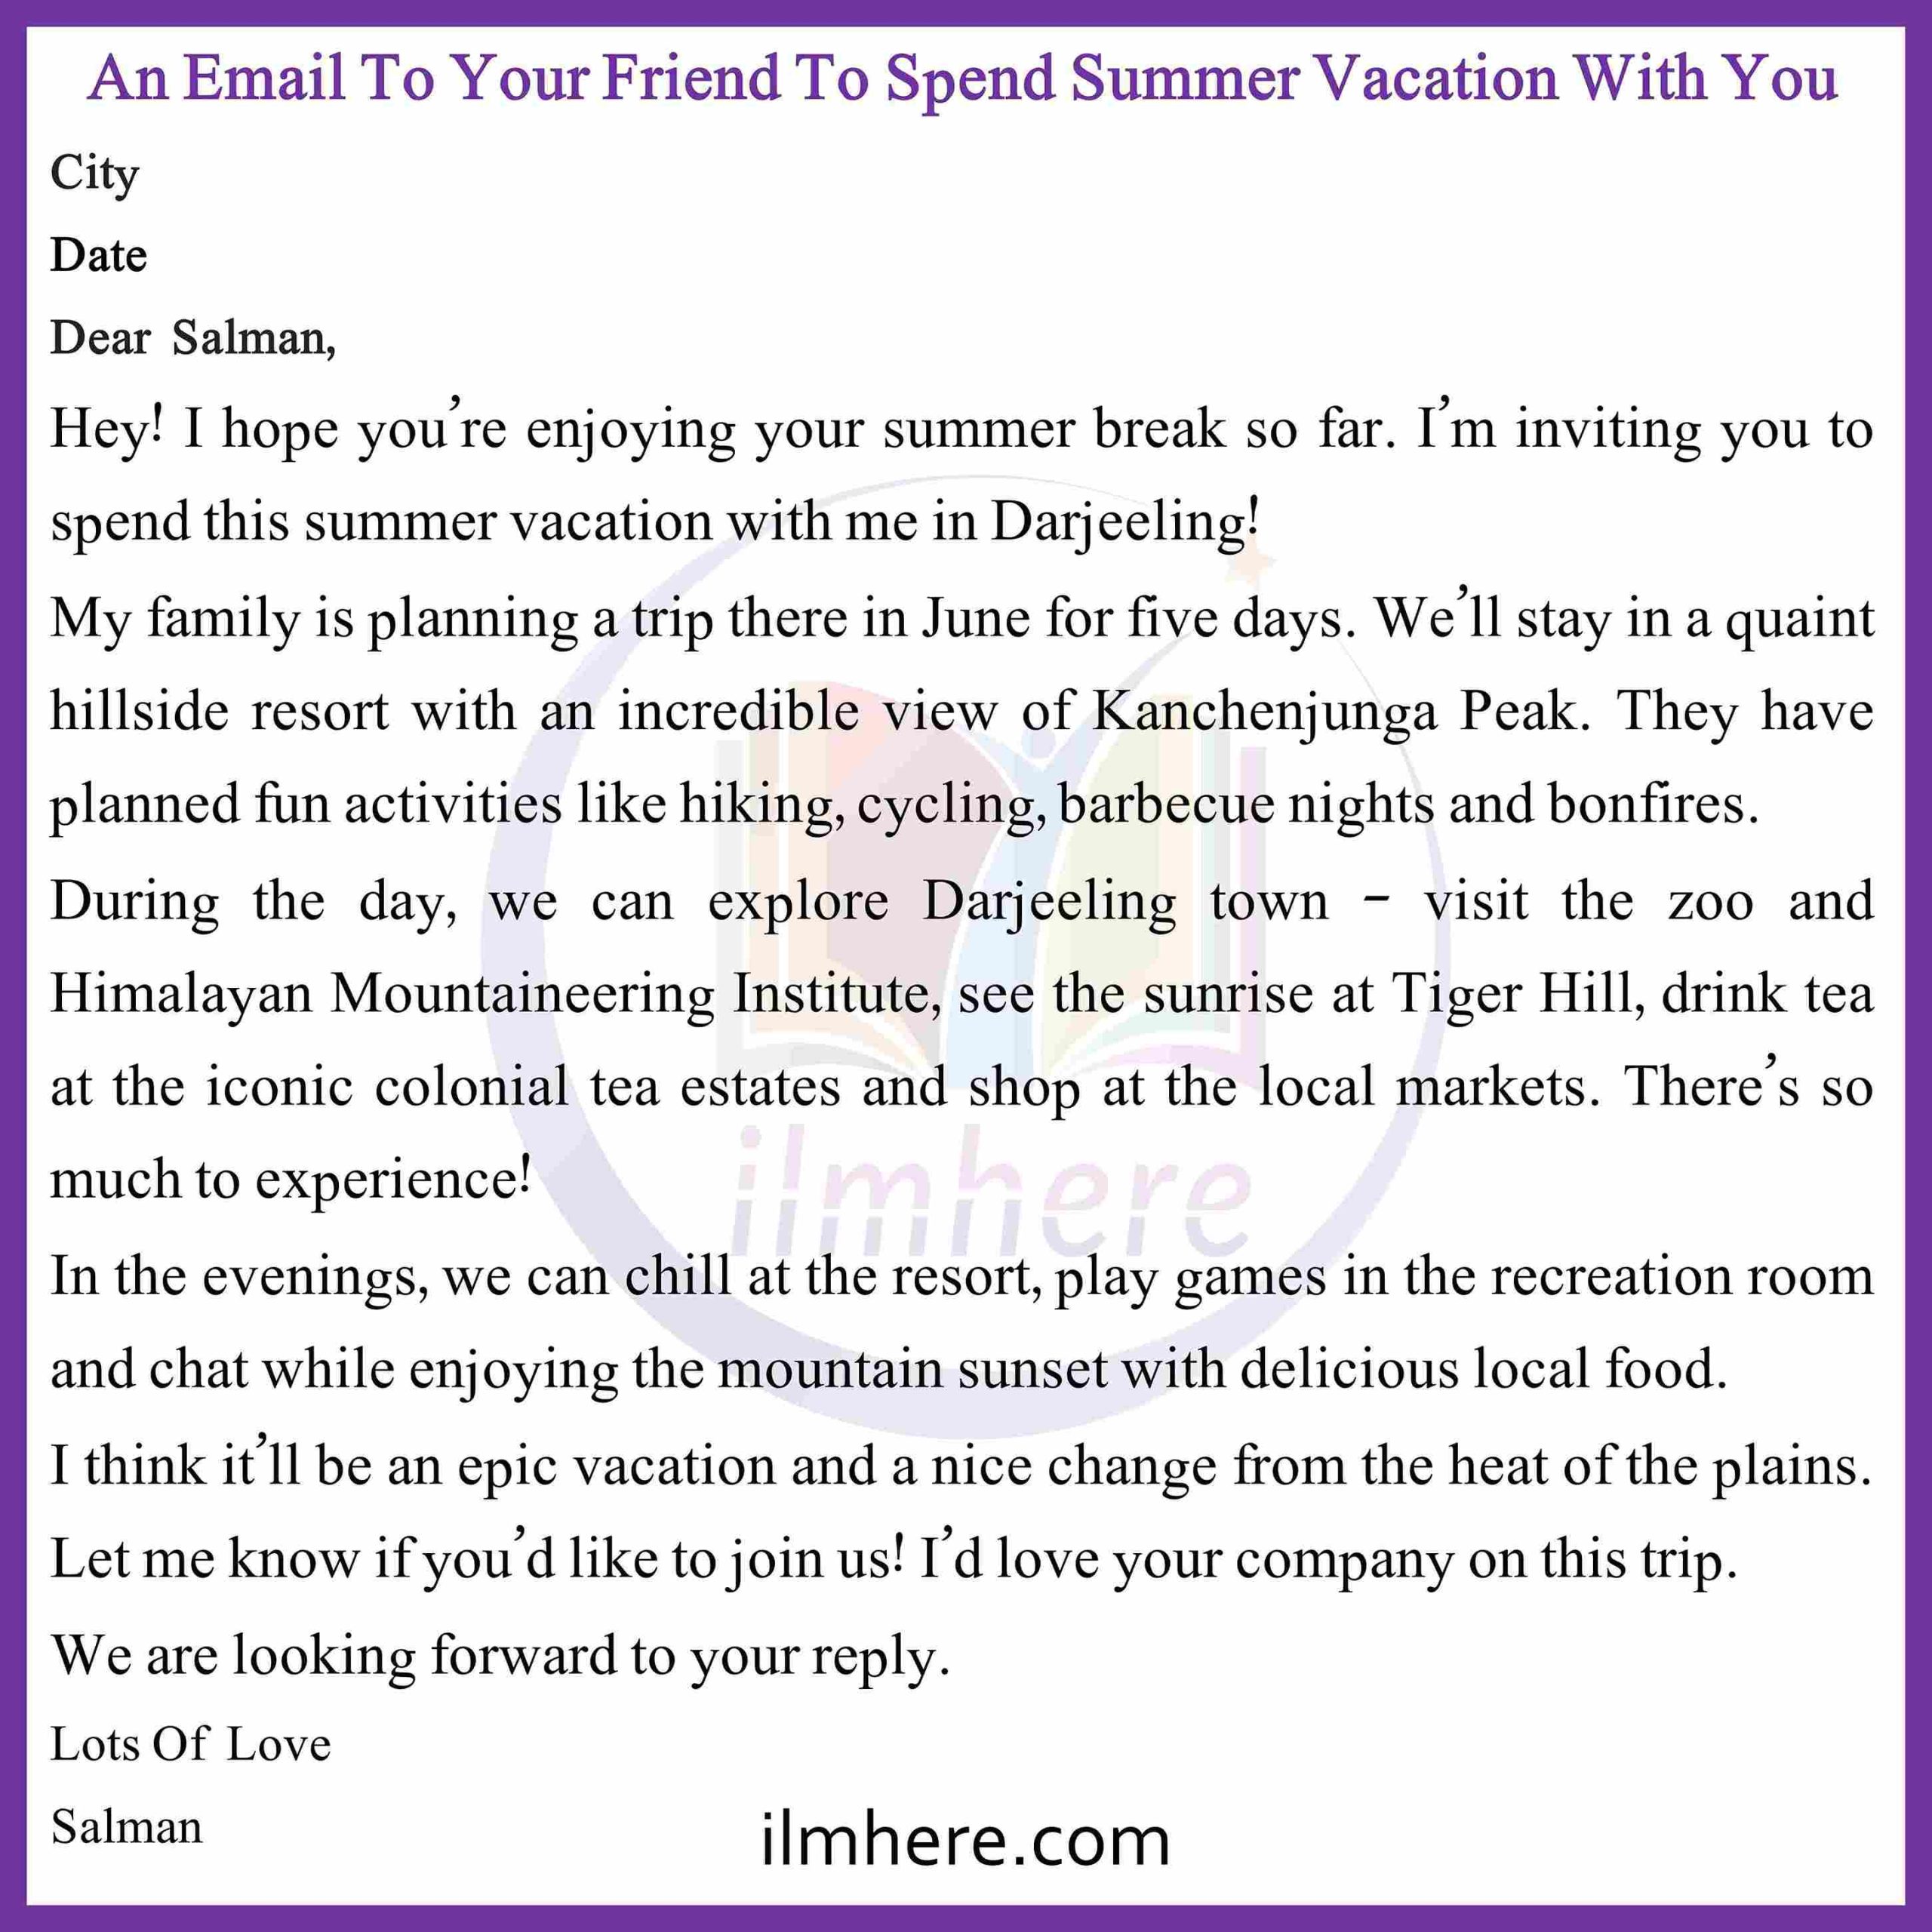 How to Write An Email To Your Friend To Spend Summer Vacation With You